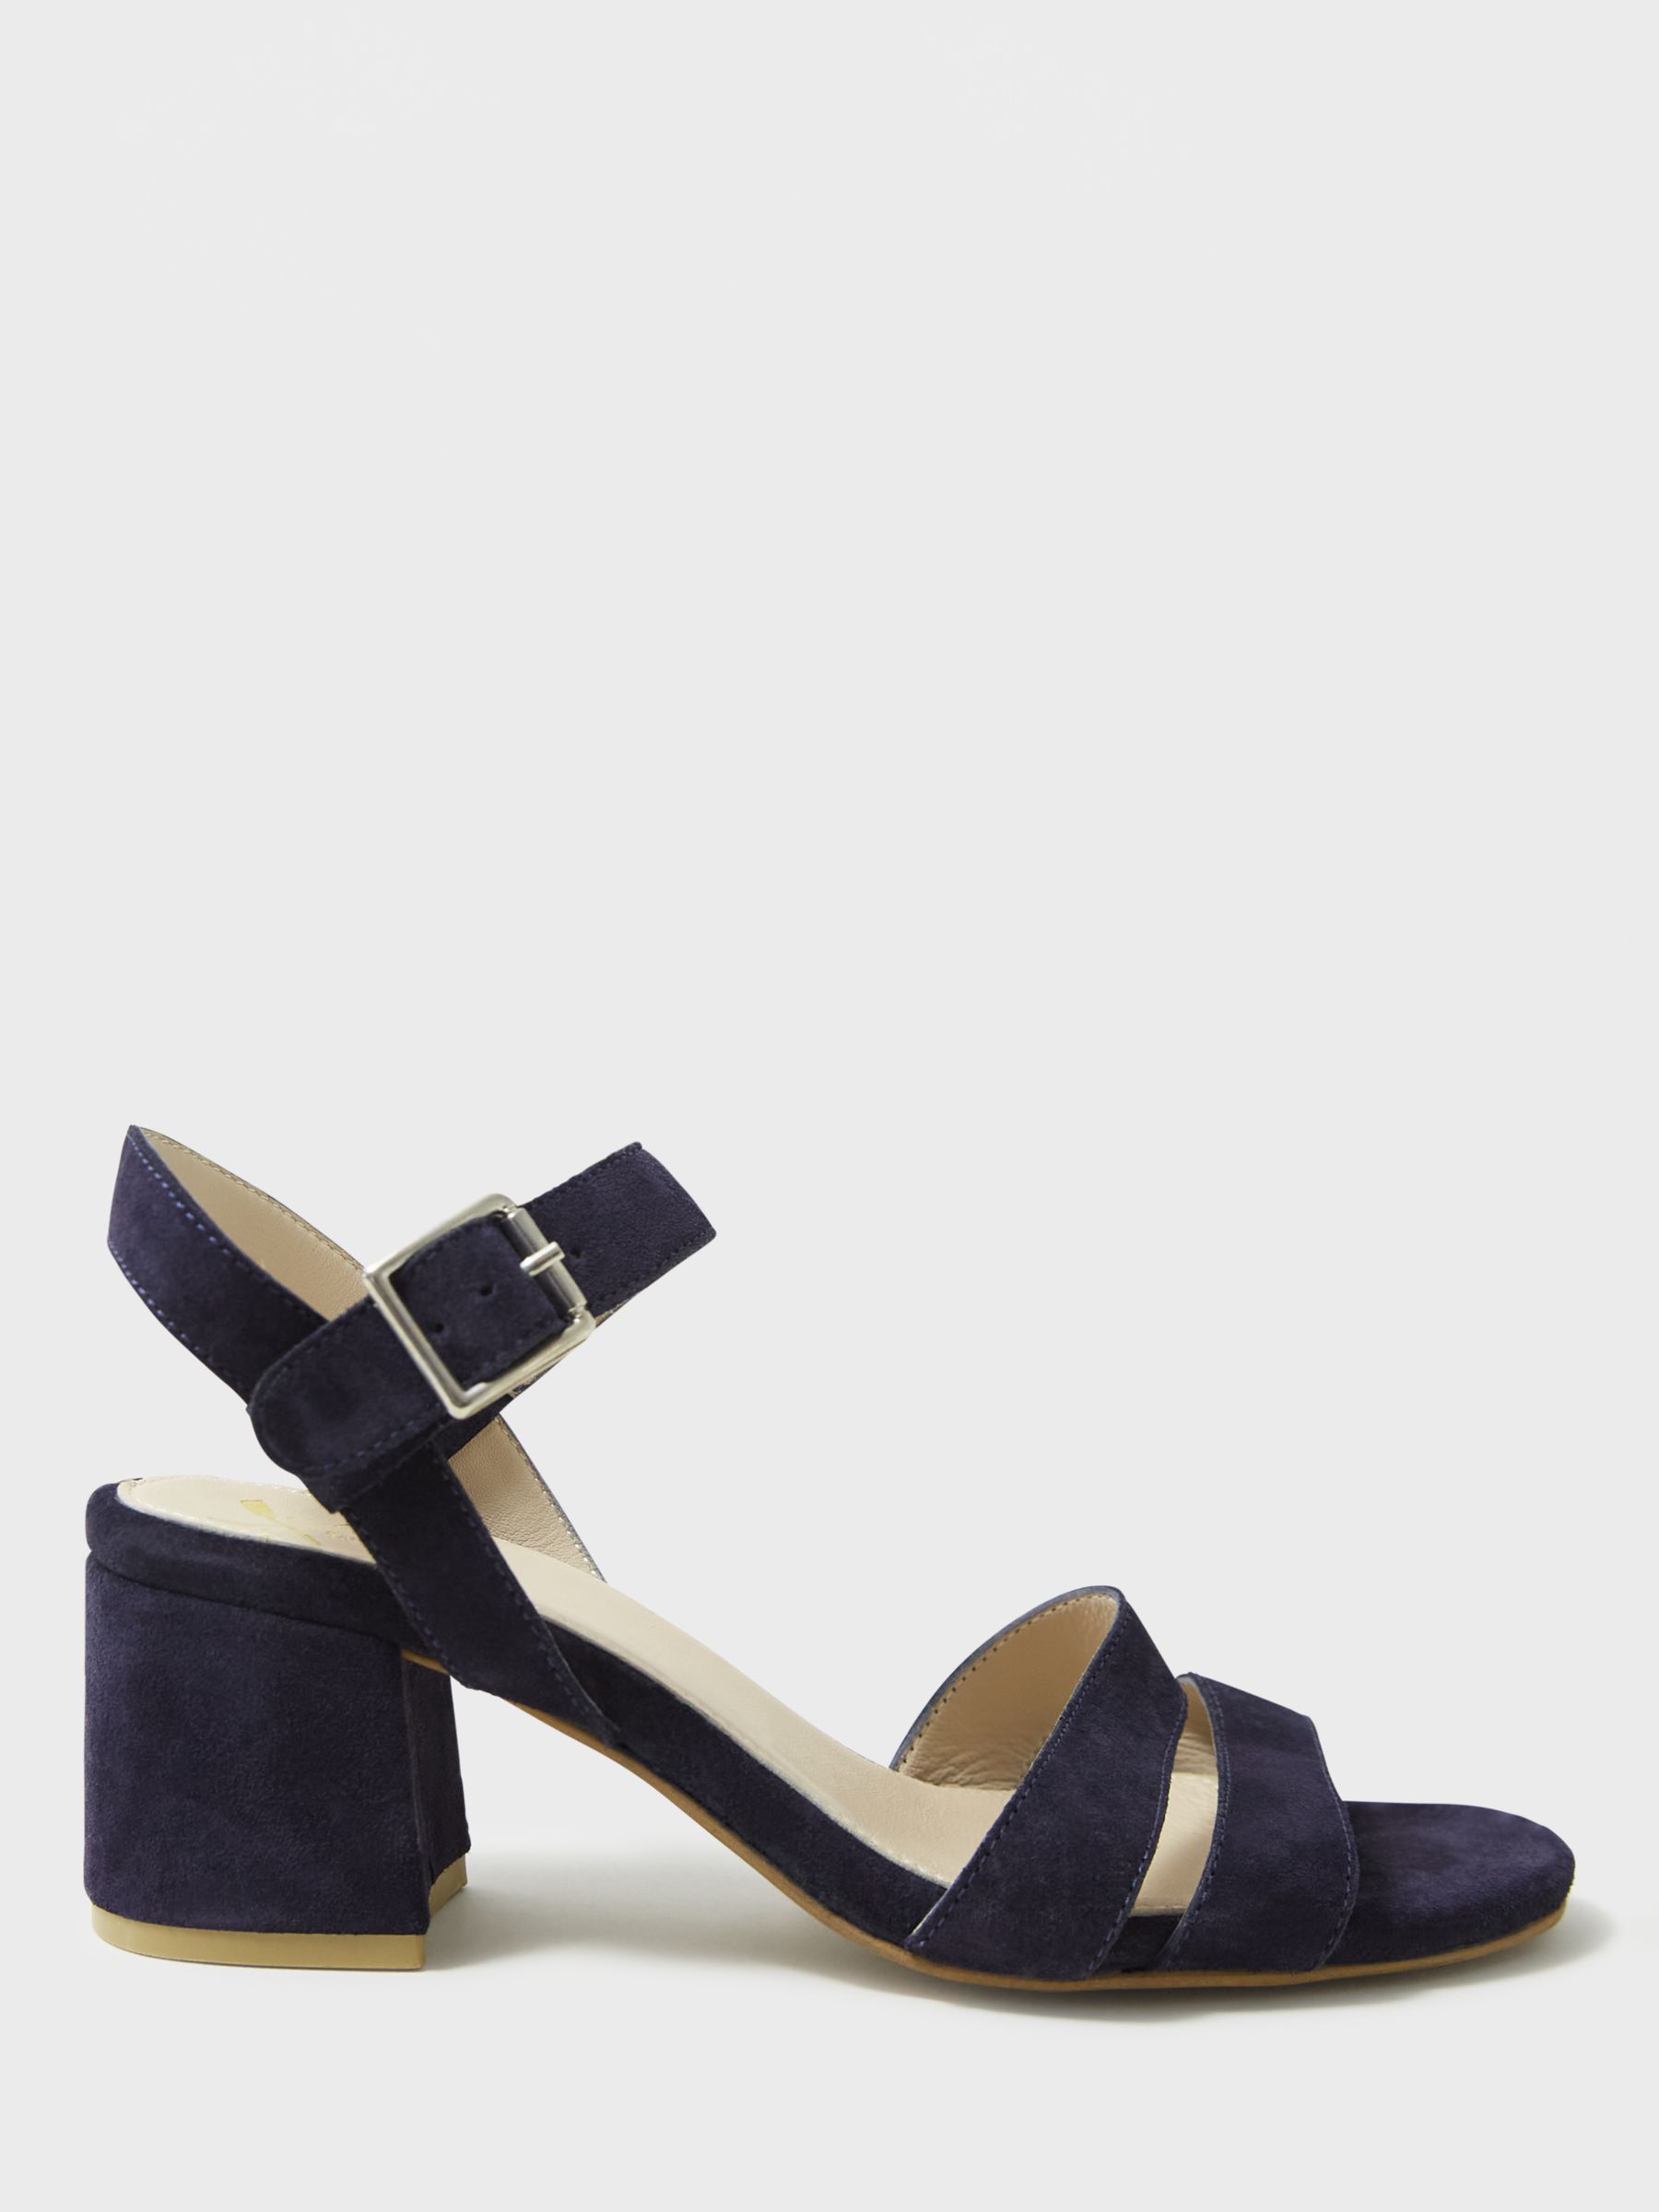 Crew Clothing Suede Double Strap Sandals, Navy Blue, 8